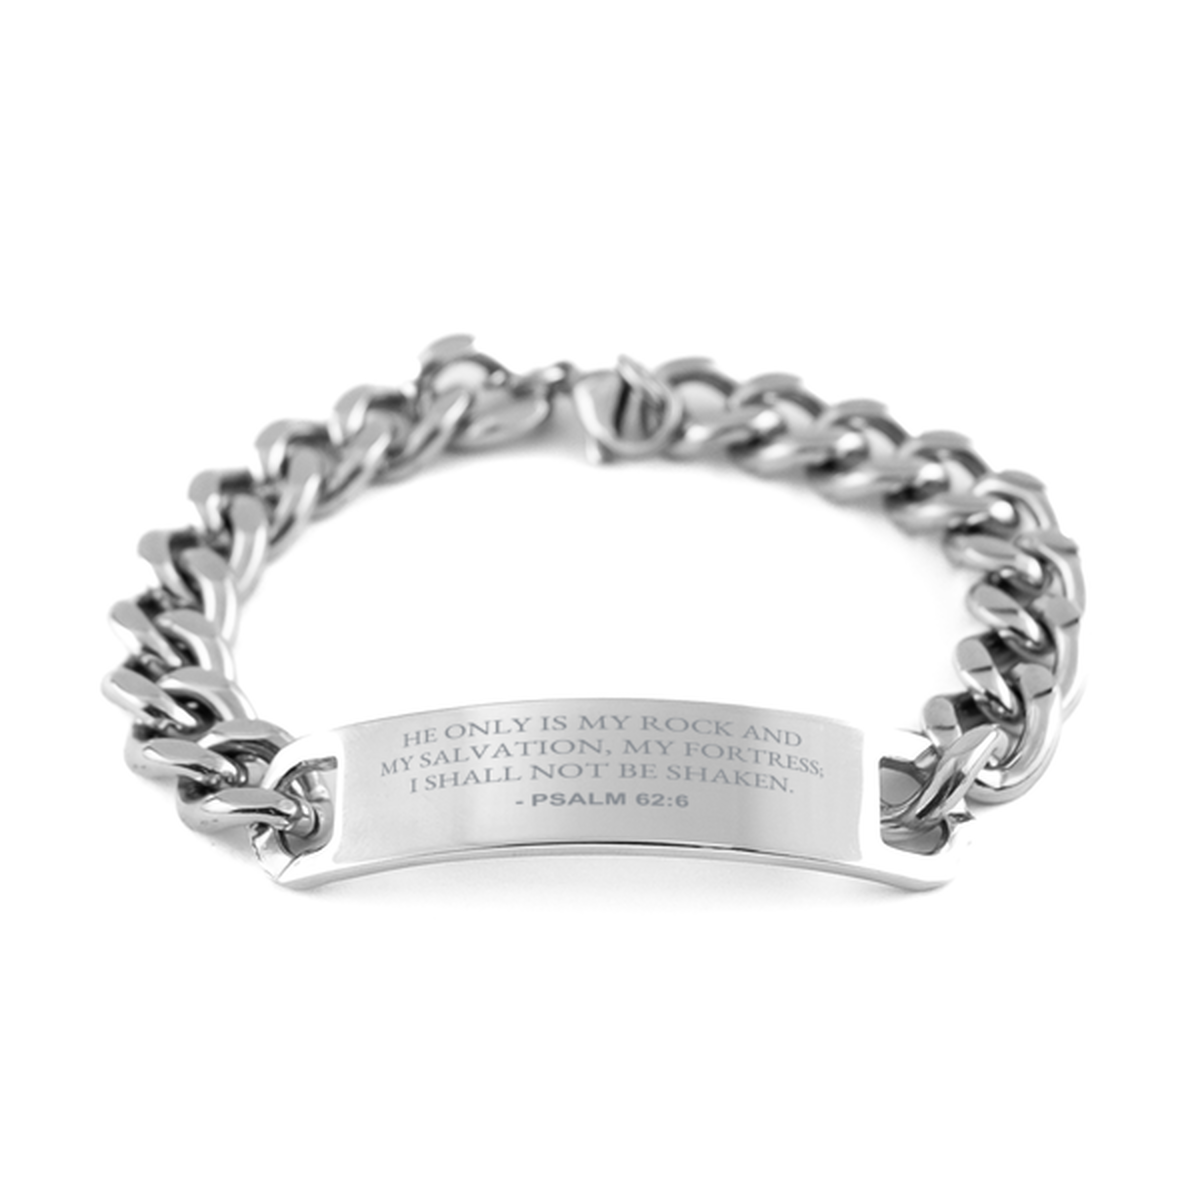 Bible Verse Chain Stainless Steel Bracelet, Psalm 62:6 He Only Is My Rock And My Salvation, My Fortress;, Inspirational Christian Gifts For Men Women